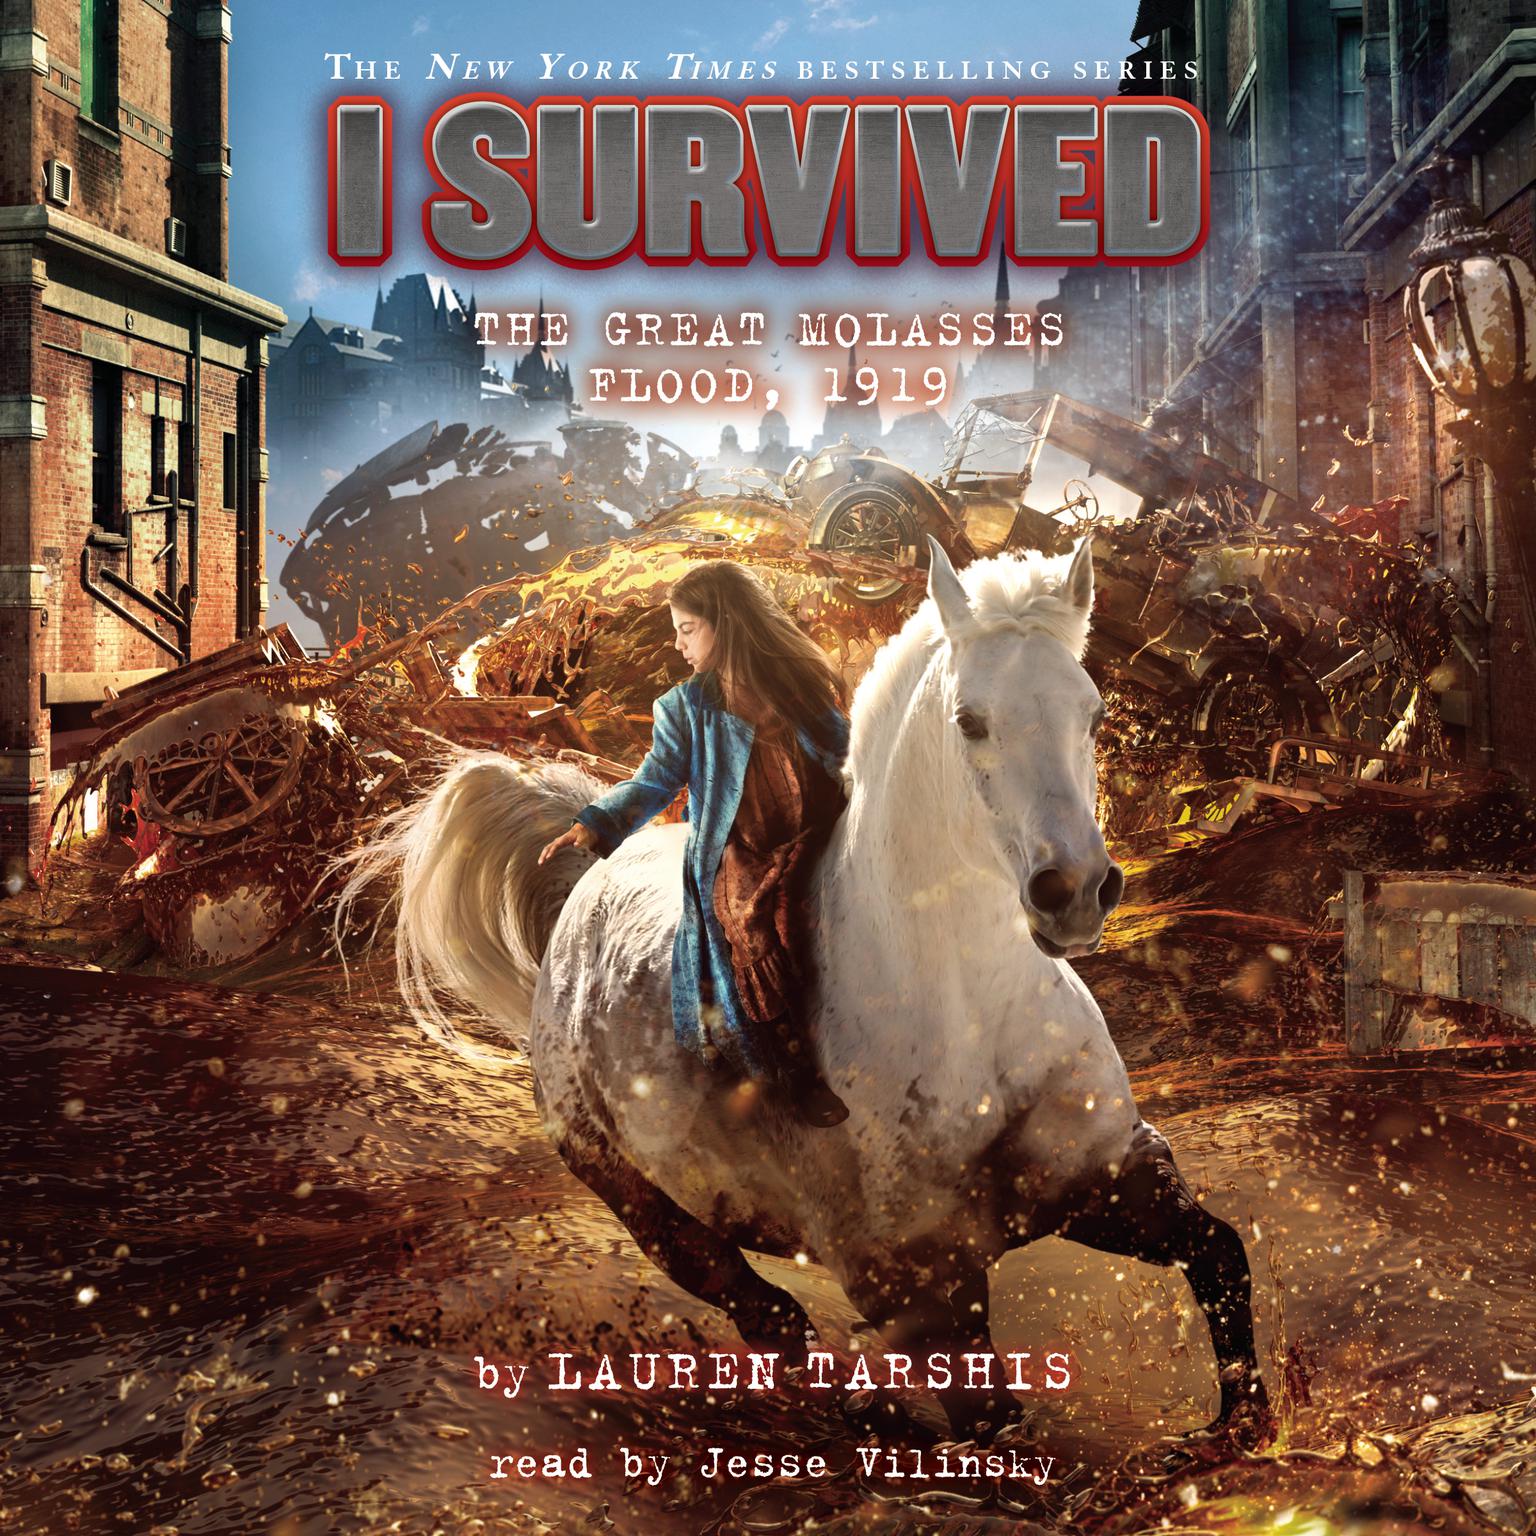 I Survived the Great Molasses Flood, 1919 (I Survived #19) Audiobook, by Lauren Tarshis